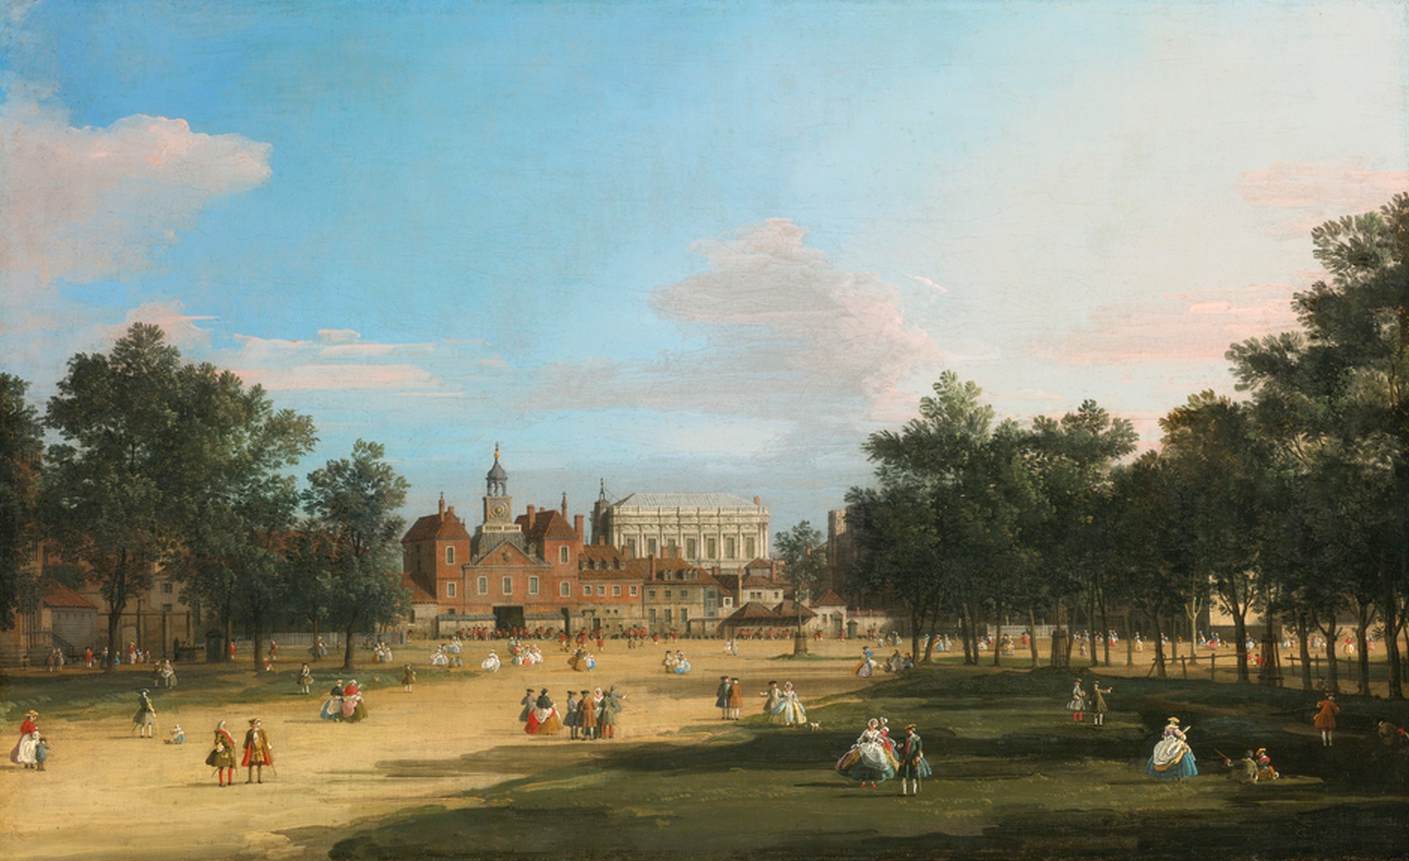 View of the Old Horse Guards and Banquet Hall